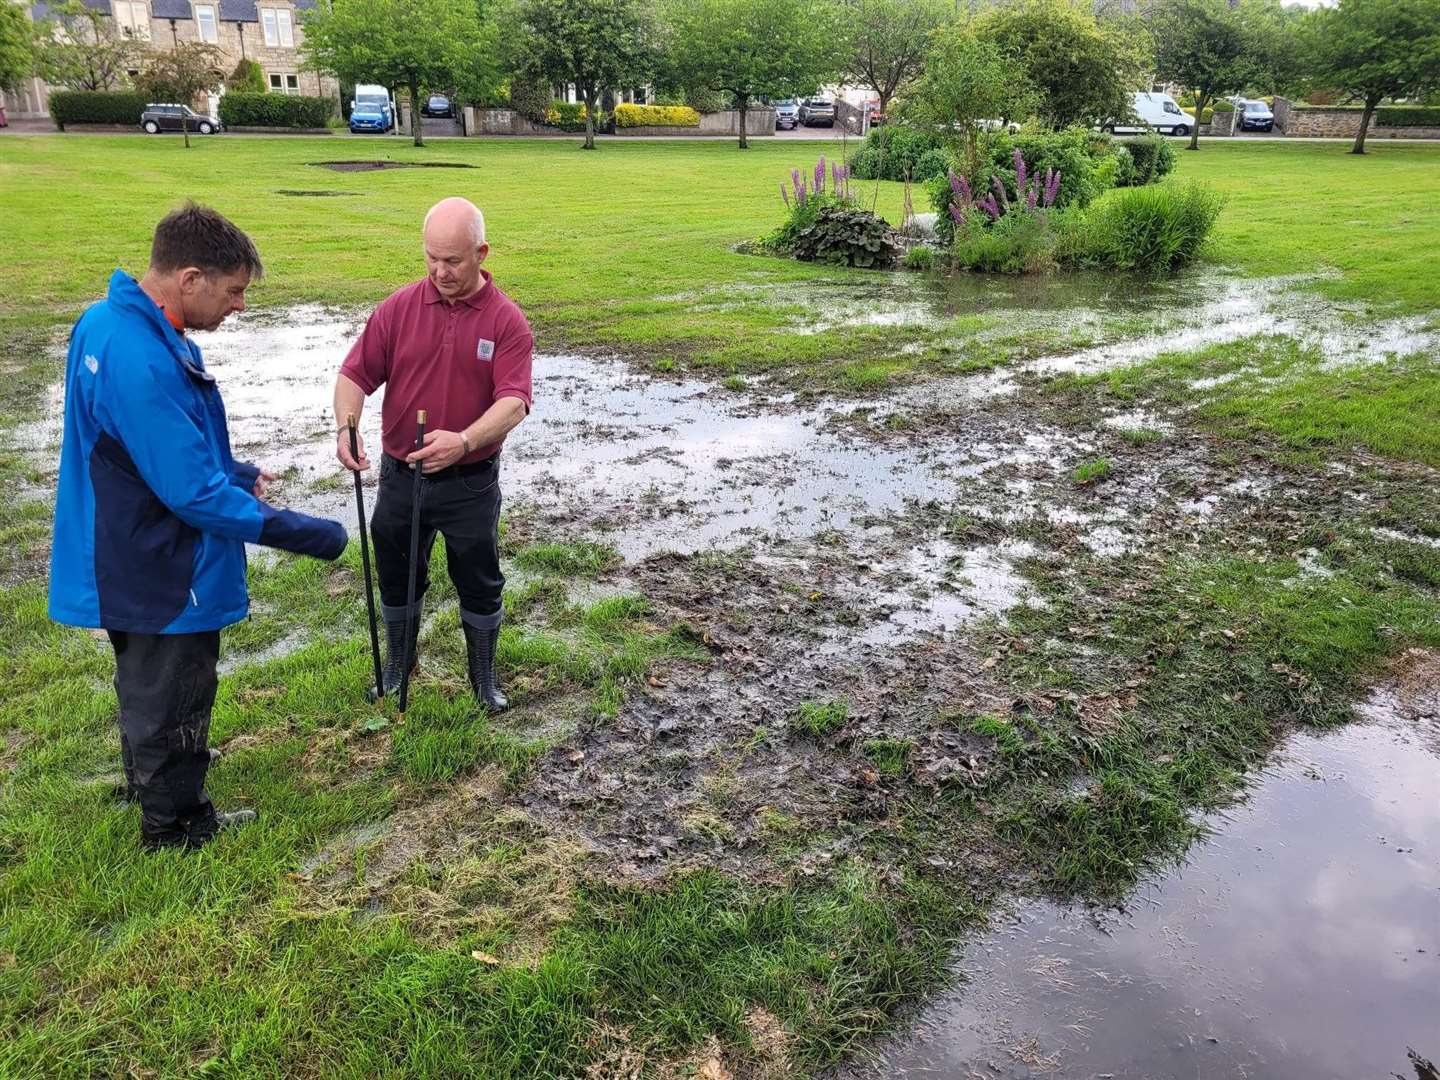 John Innes (right) surveying the damage and drains following last month's flash flood.